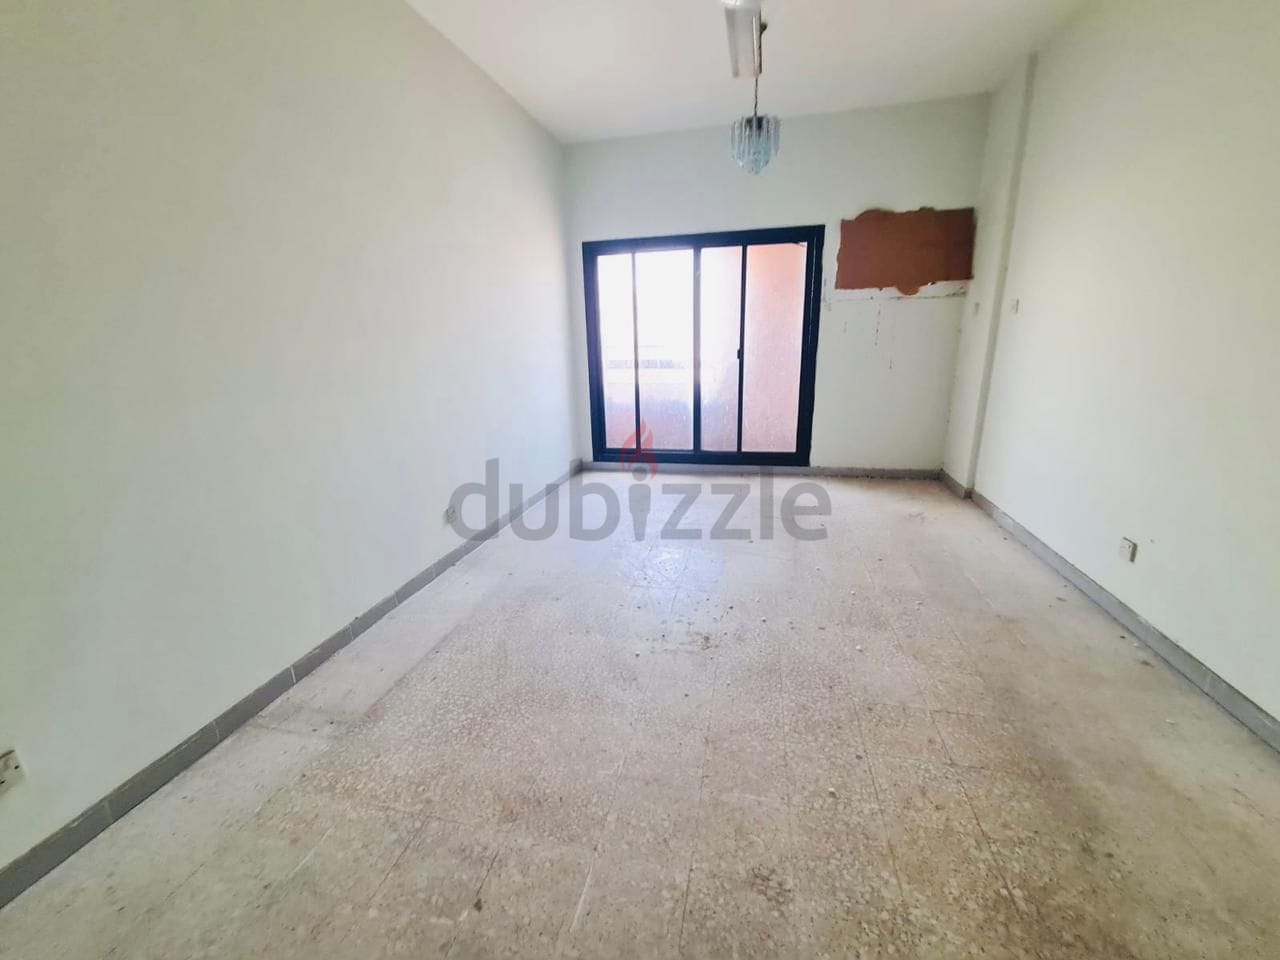 Limited Offer!! Spacious Studio Brand New!!!